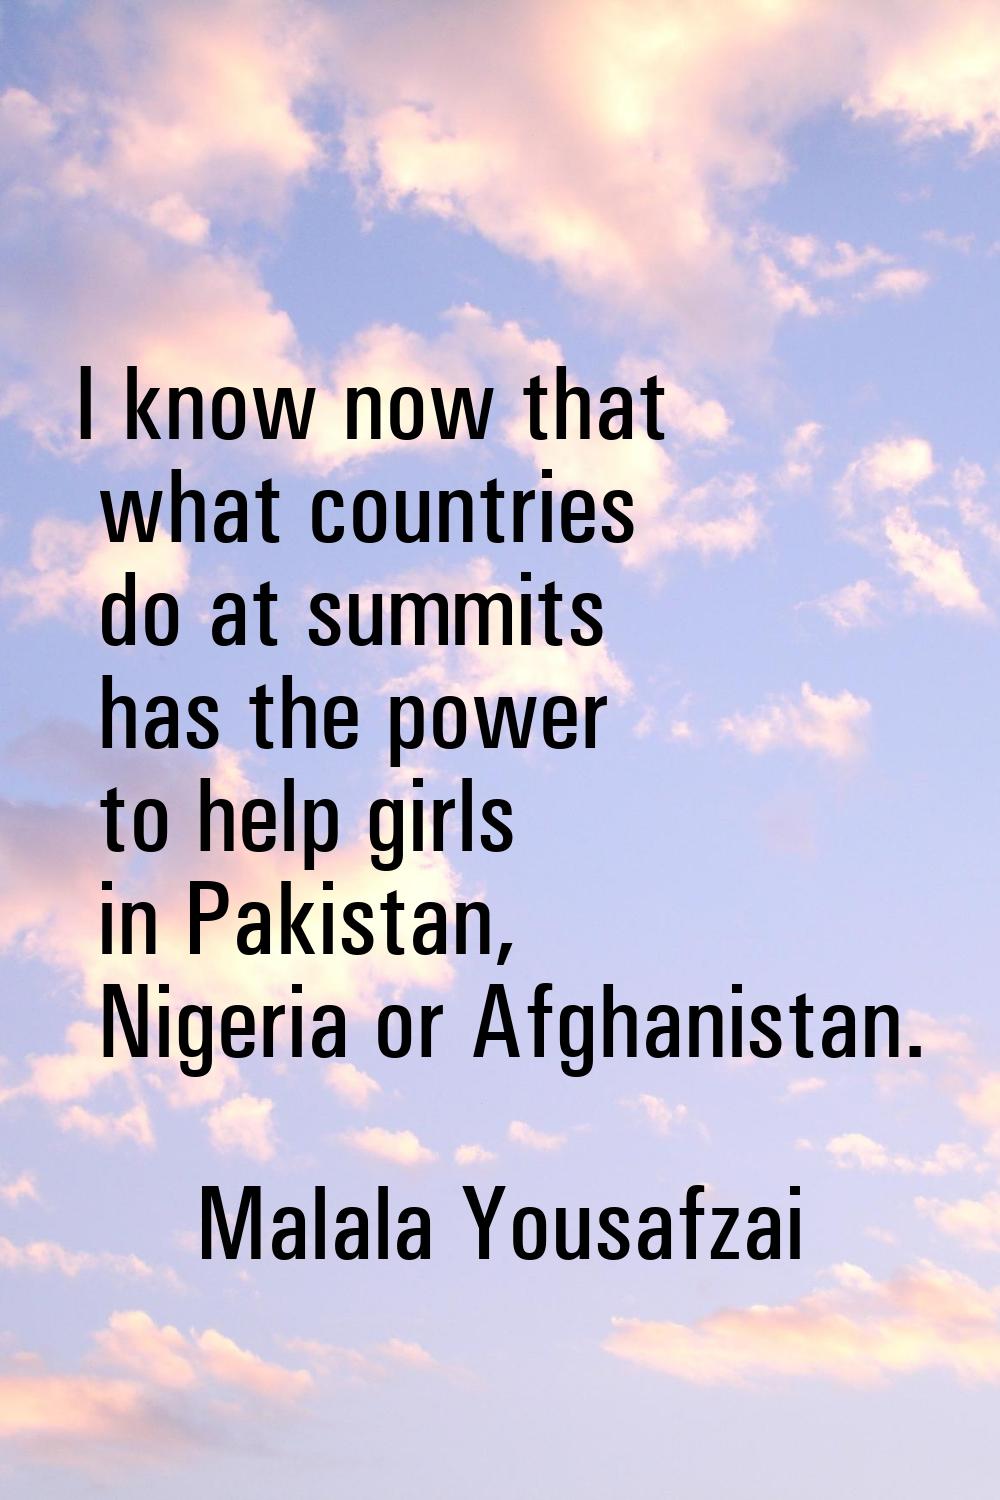 I know now that what countries do at summits has the power to help girls in Pakistan, Nigeria or Af